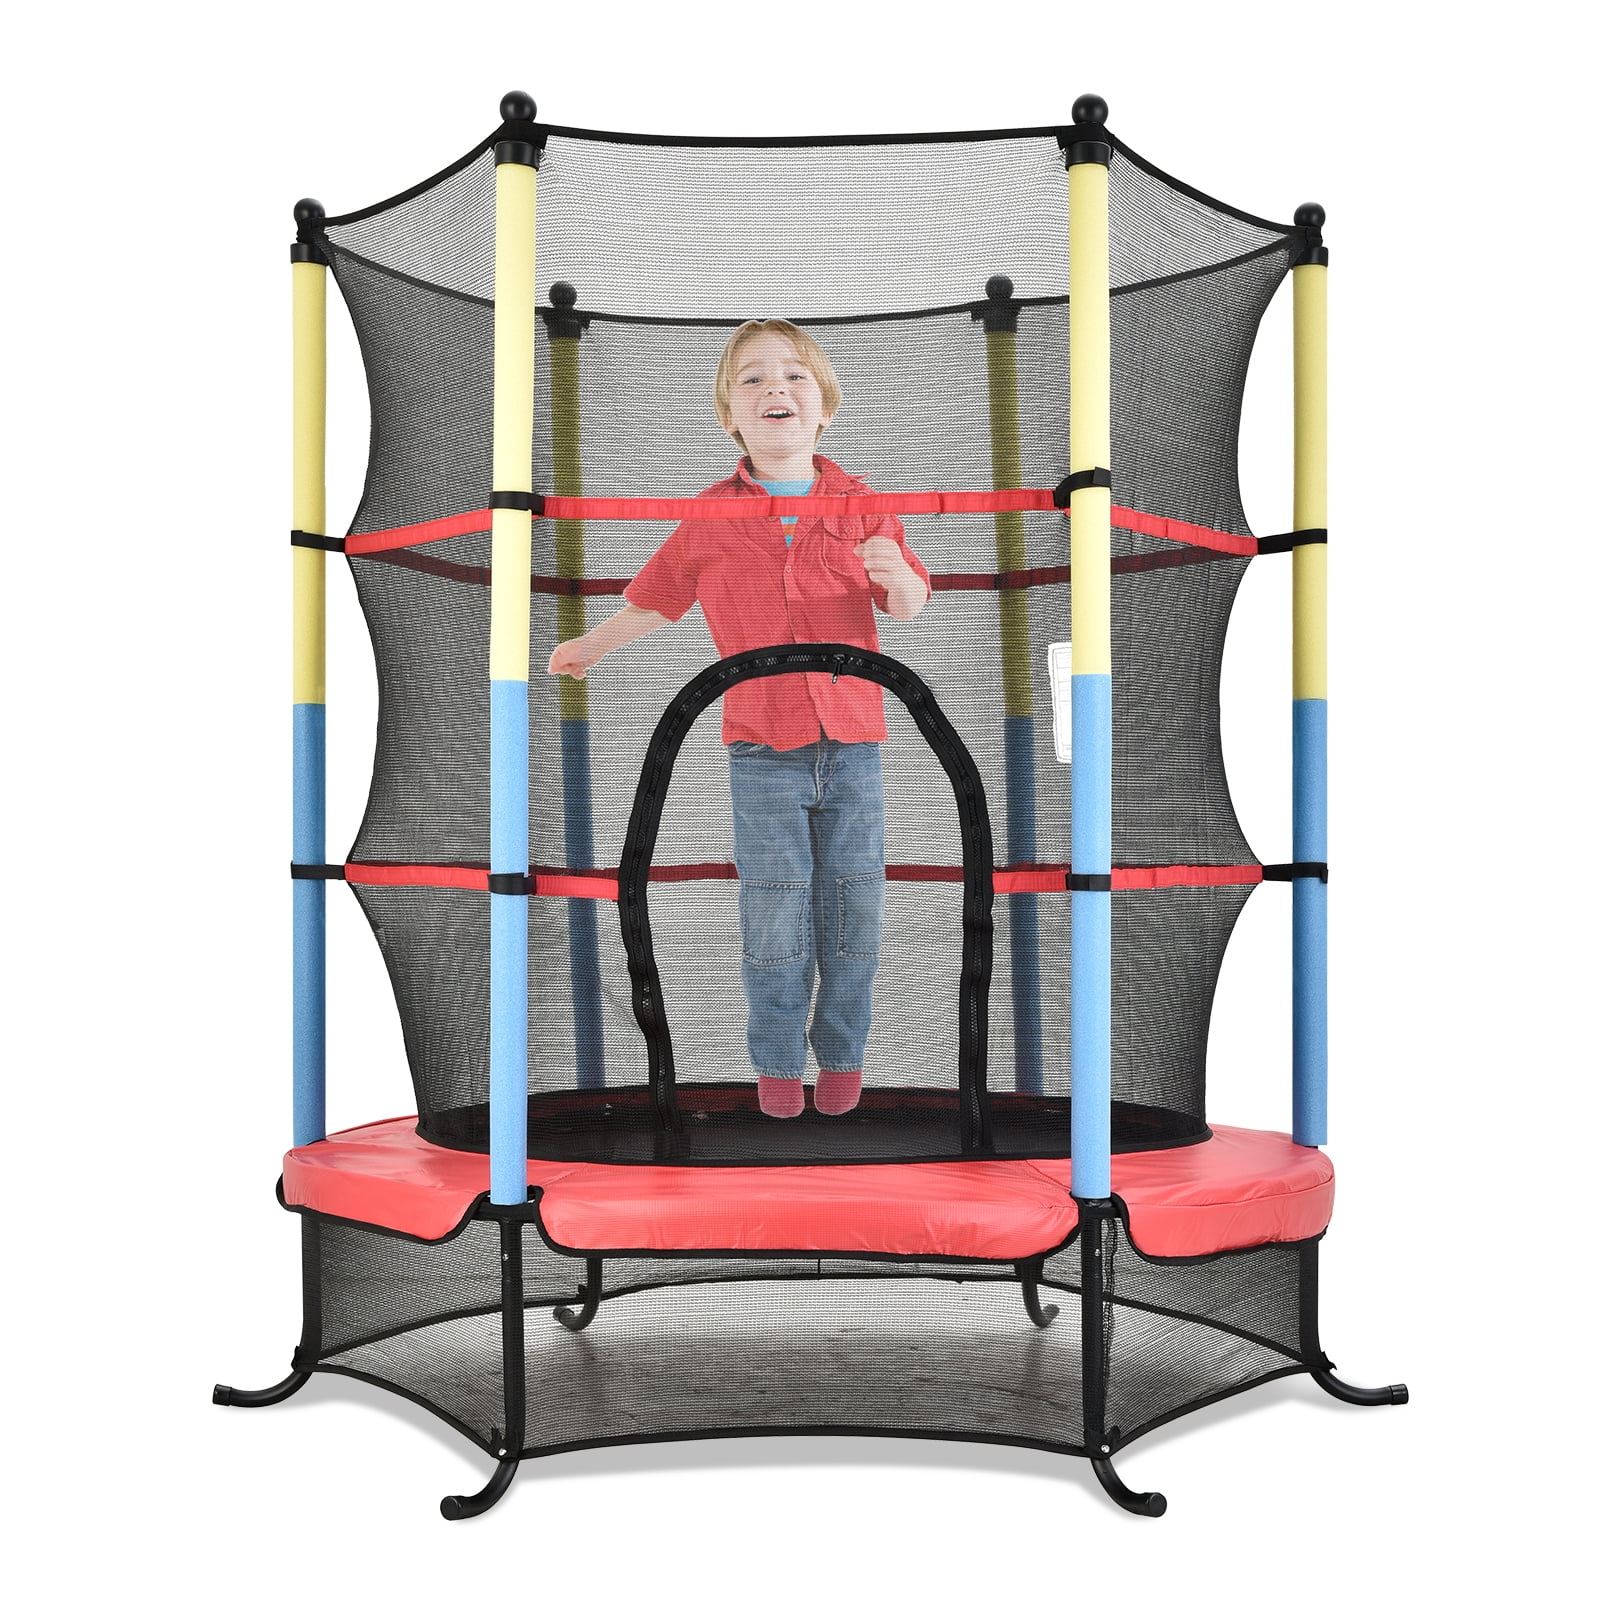 Youth Jumping Round Trampoline 5FT Exercise W/Safety Pad Enclosure Combo Kid Toy 